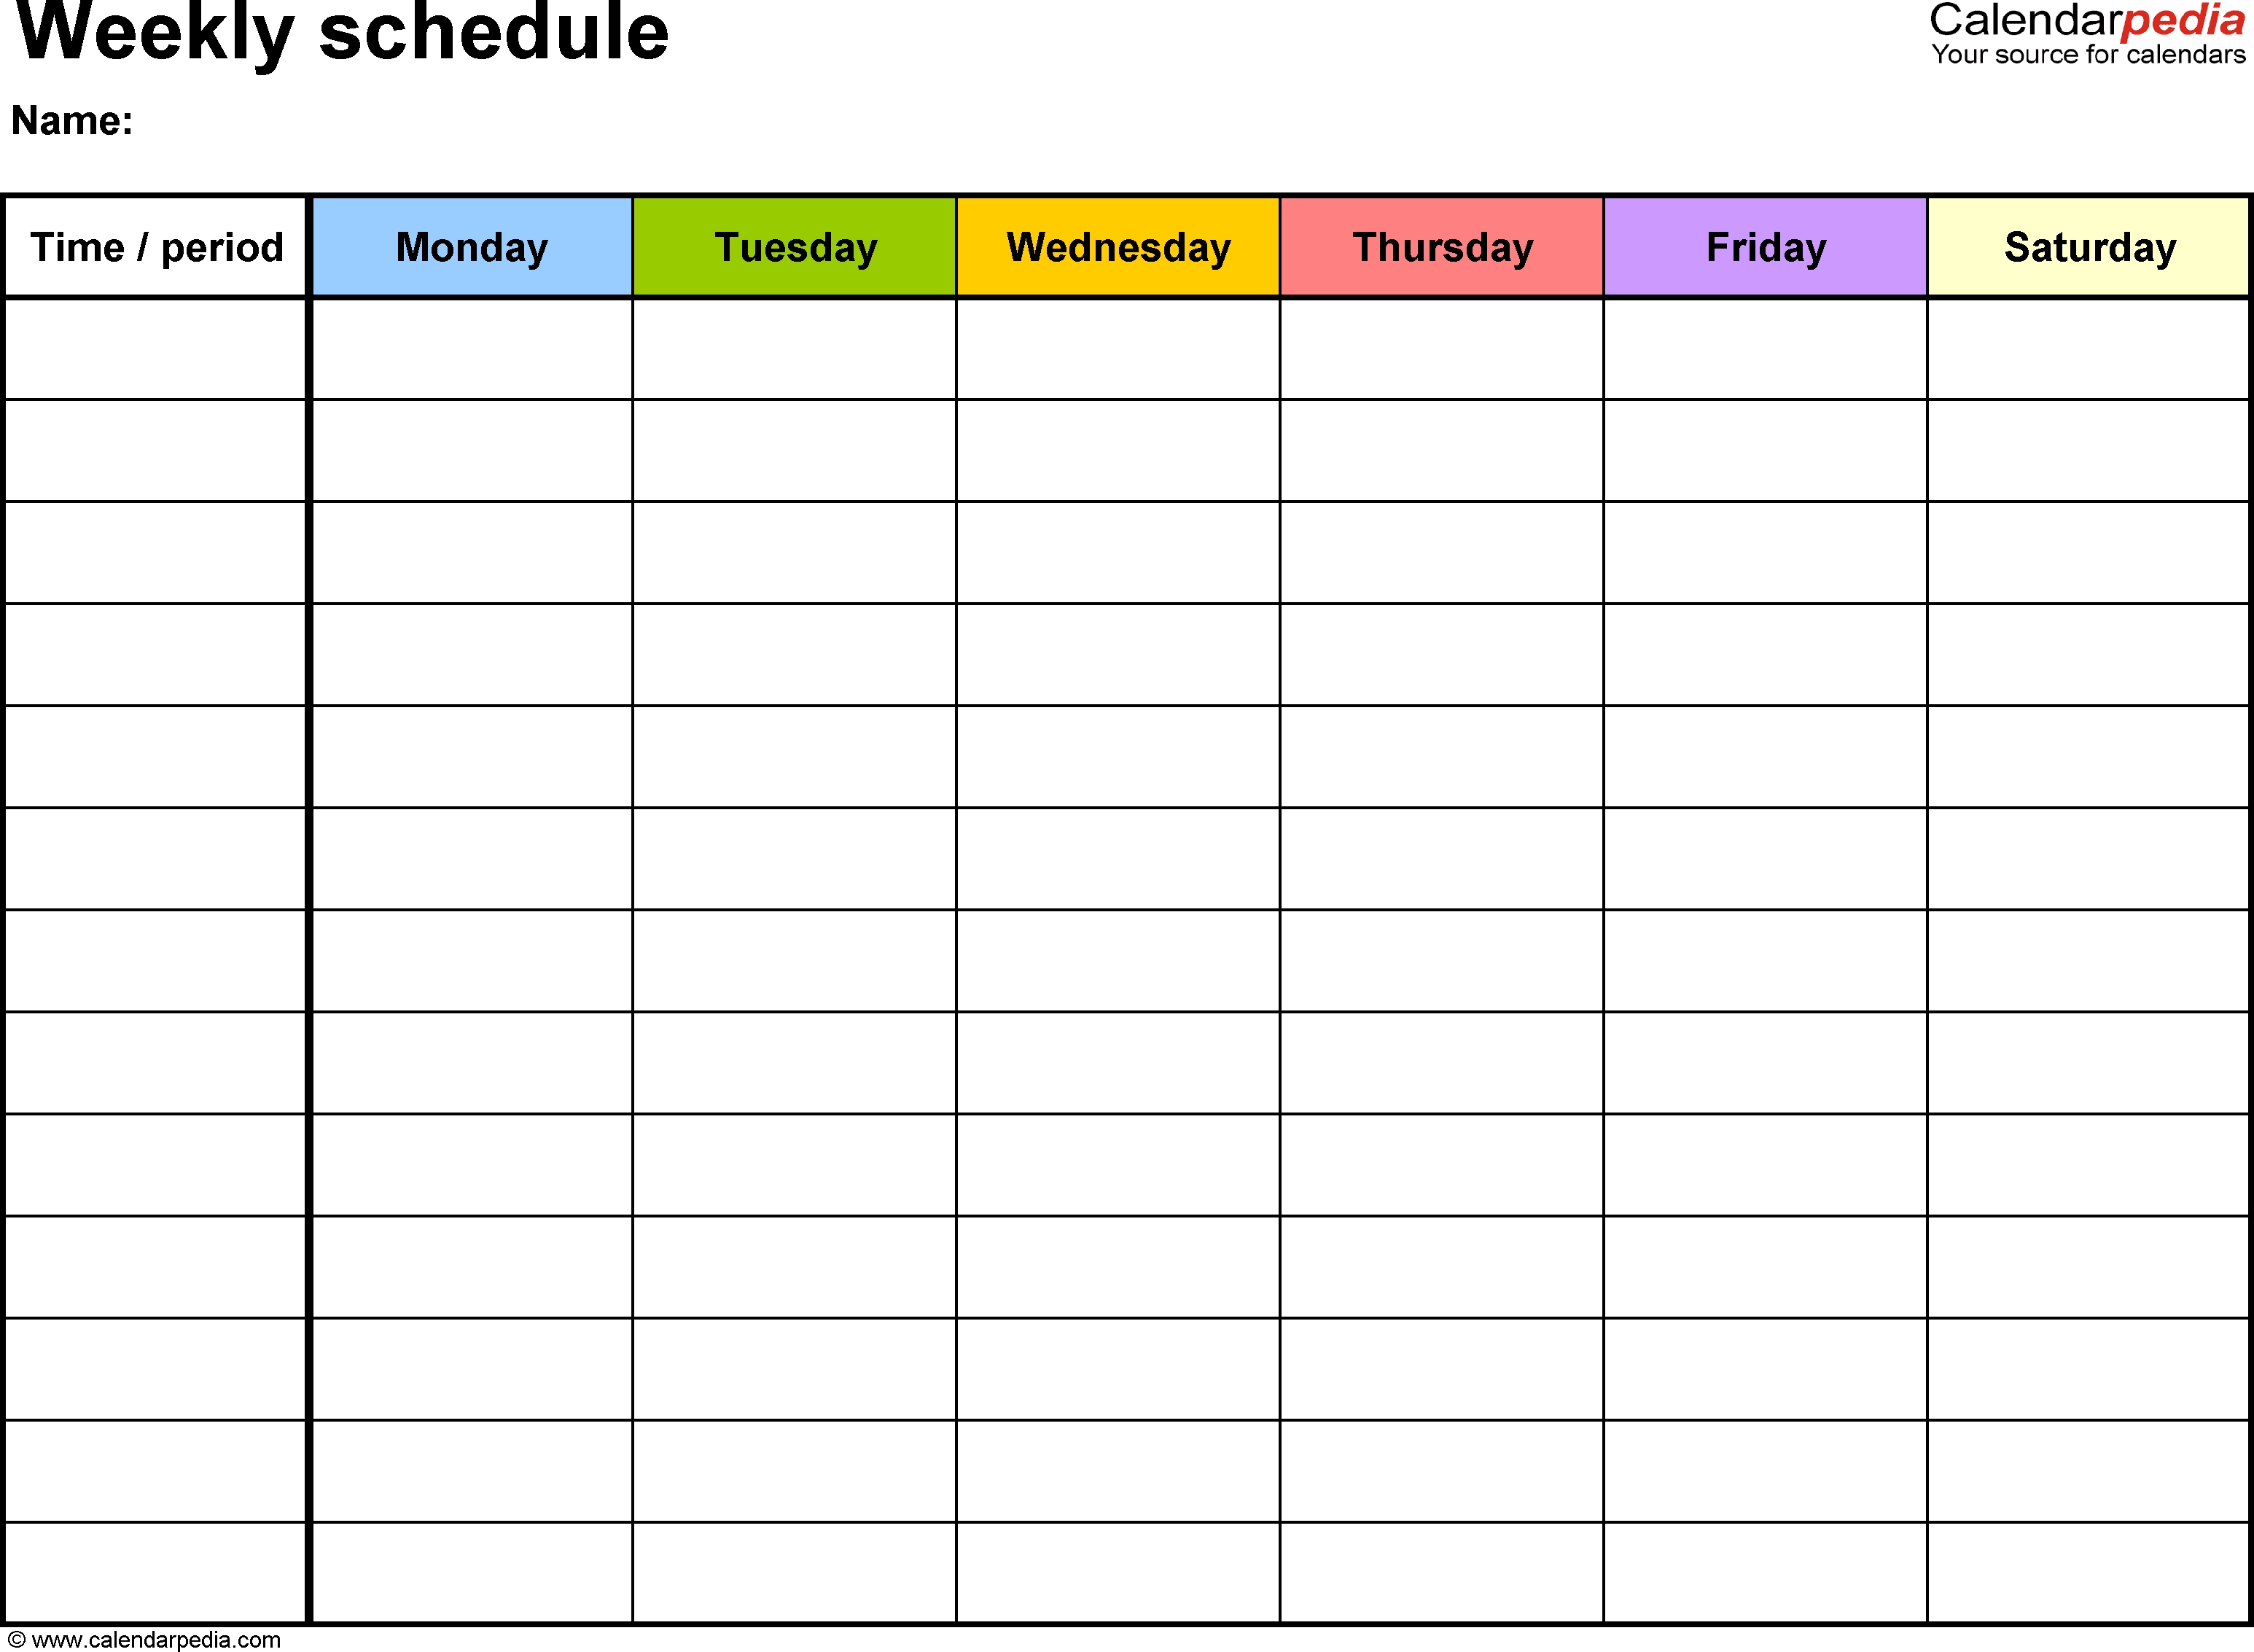 Free Weekly Schedule Templates For Word - 18 Templates-Calendar Fill In Templates